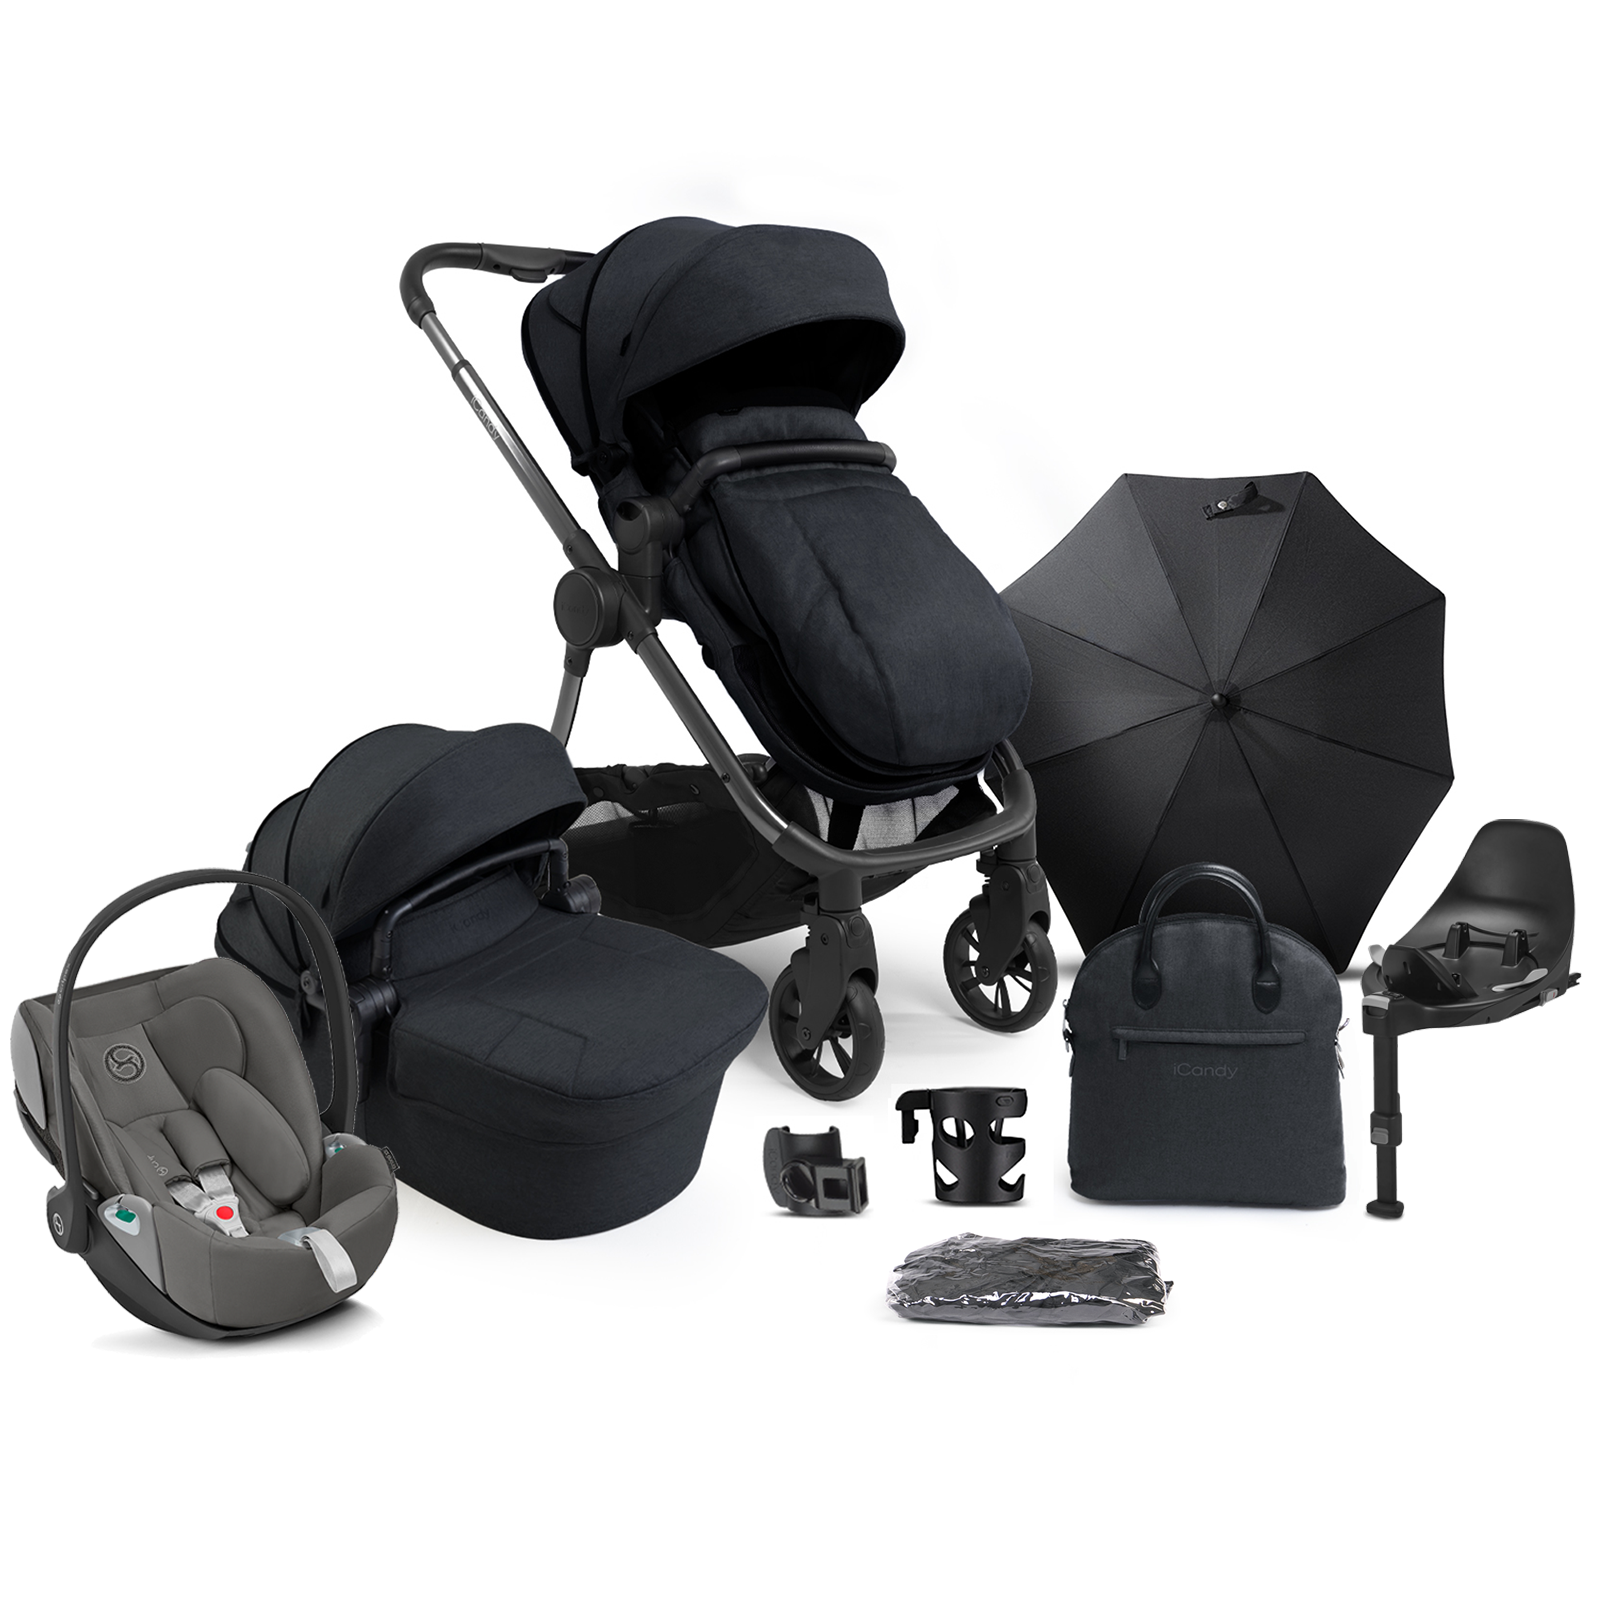 iCandy Lime Lifestyle (Cloud Z2) Travel System Summer Bundle with ISOFIX Base - Black